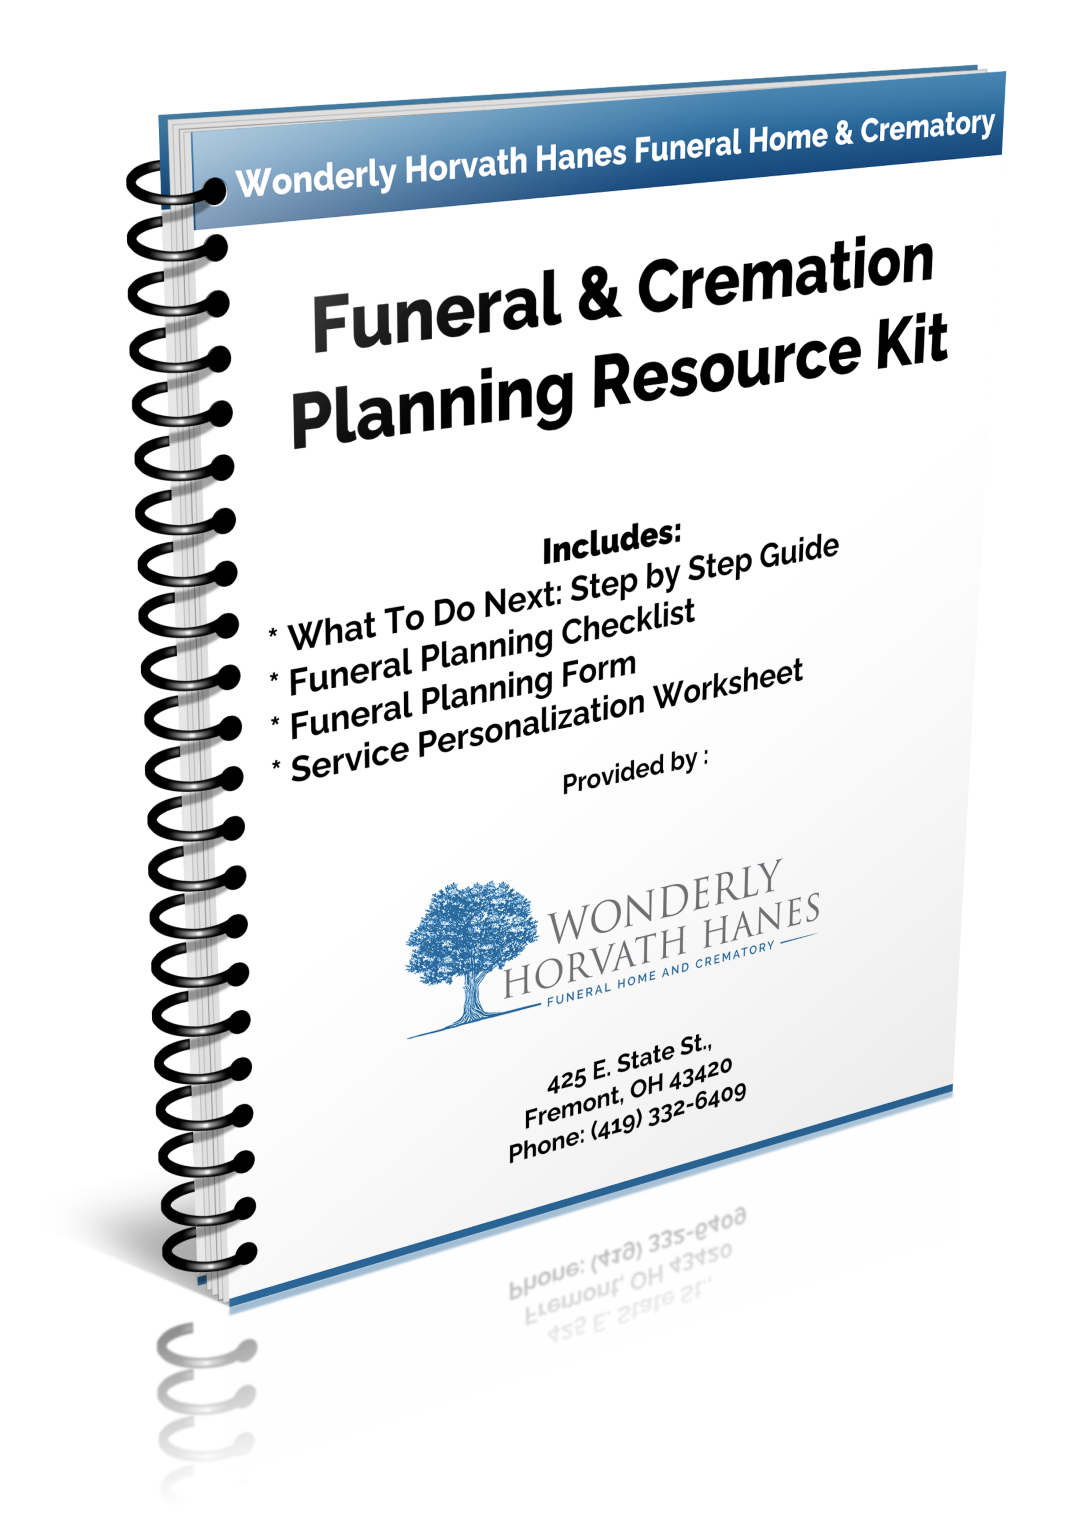 Funeral & Cremation Resource Kit